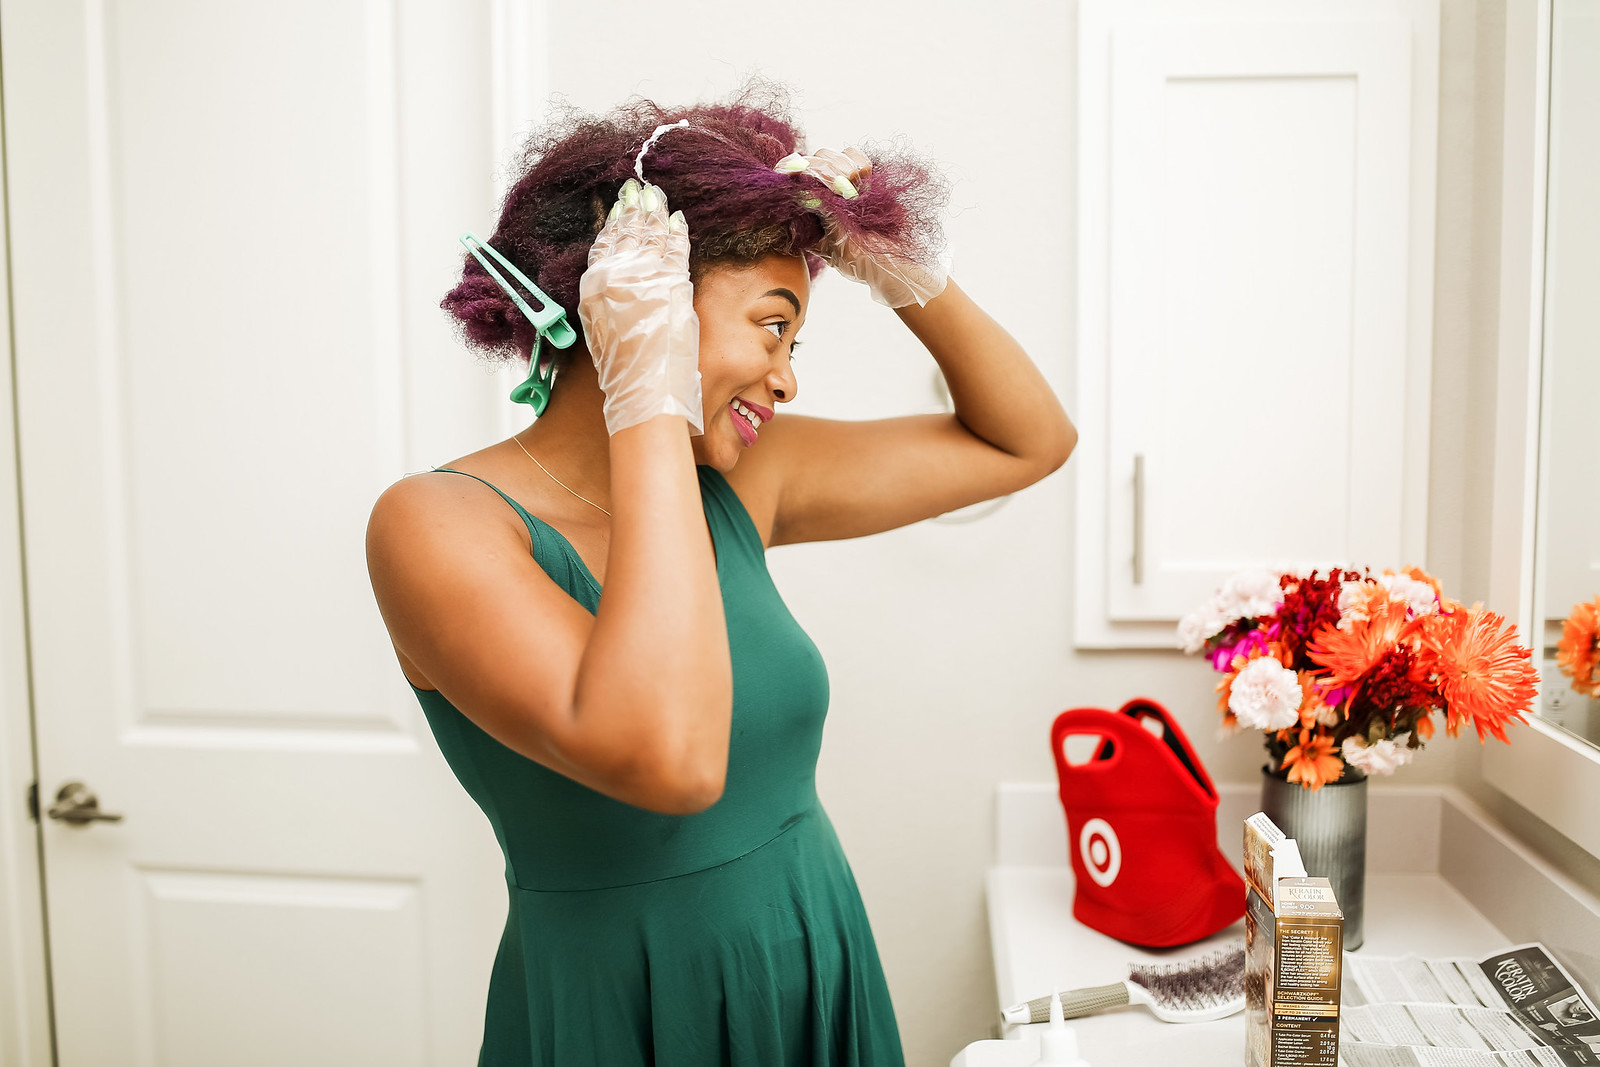 how to dye your hair safely at home